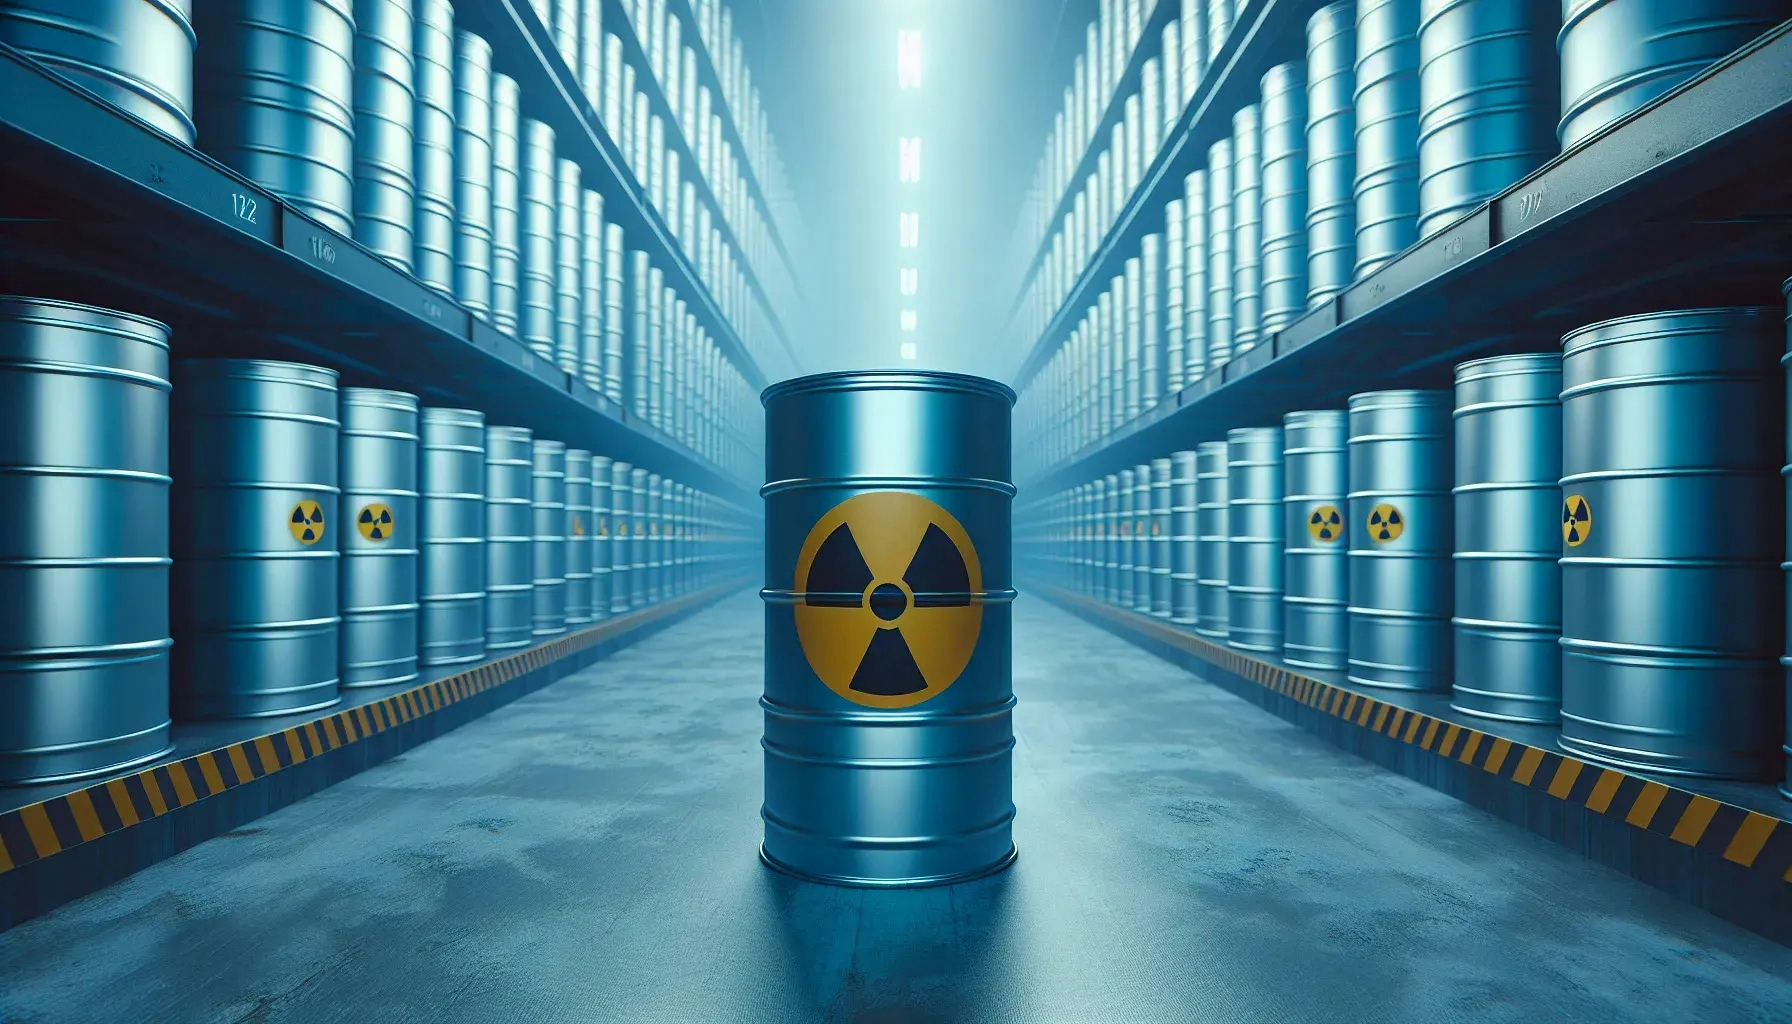 challenges in storing nuclear waste